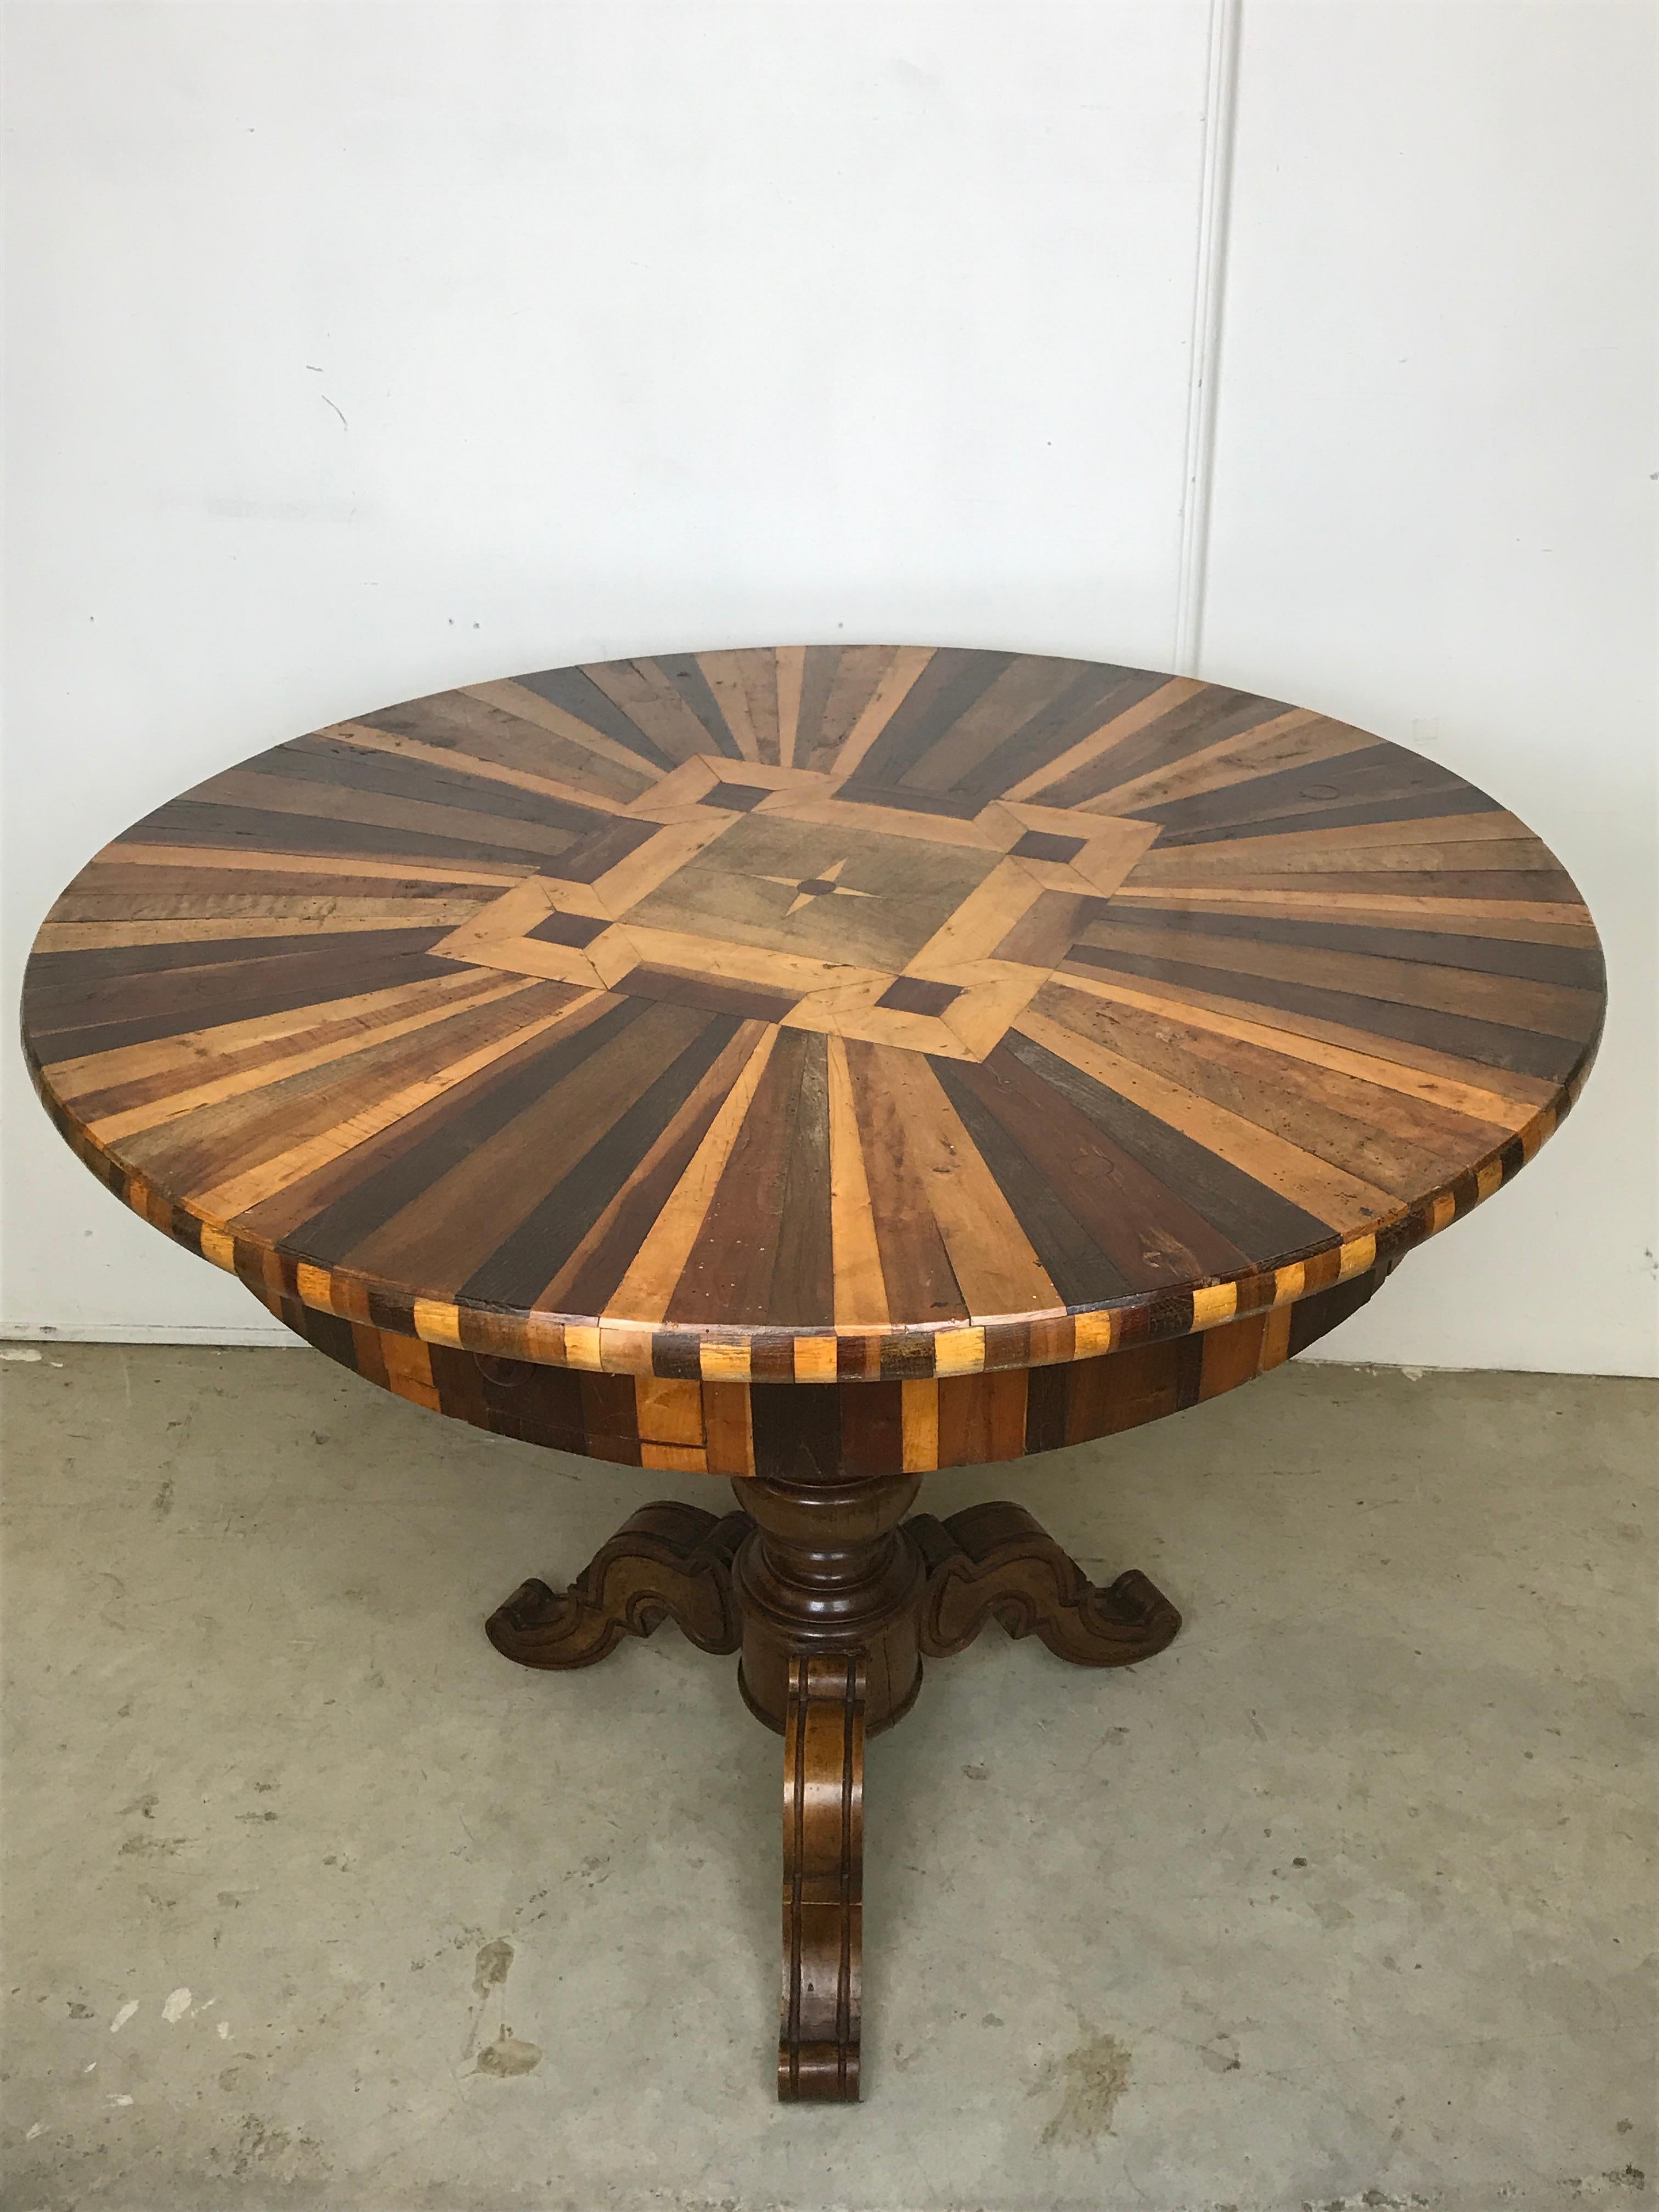 A 19th century French round table, made up of specimen pieces of wood in the top. Some of the timbers used include satinwood, walnut, mahogany, burr ash, elm.